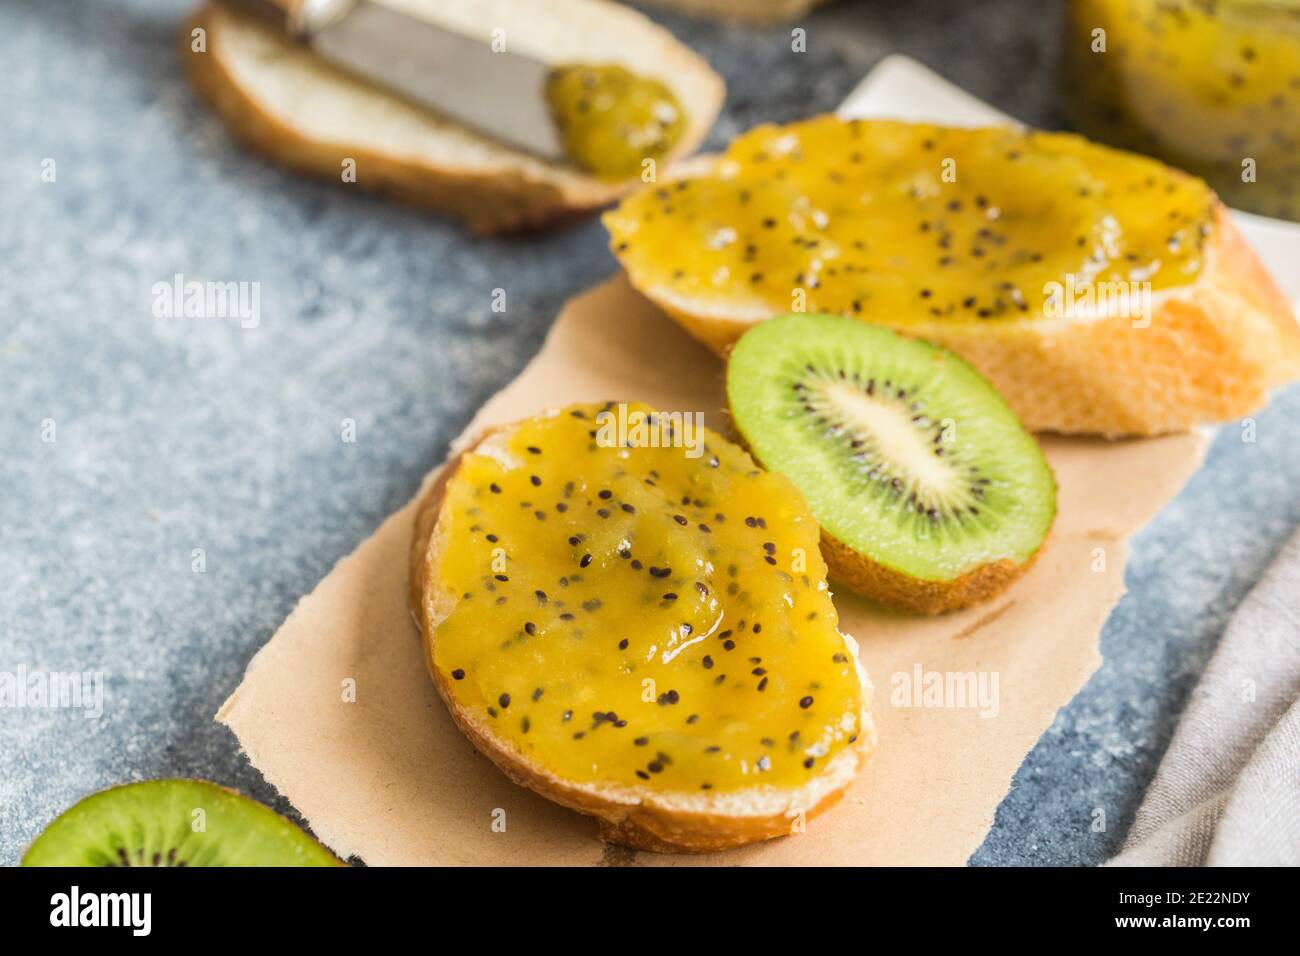 jam or marmalade made from kiwi on fresh bread. breakfast, toast with jam on a gray background Stock Photo